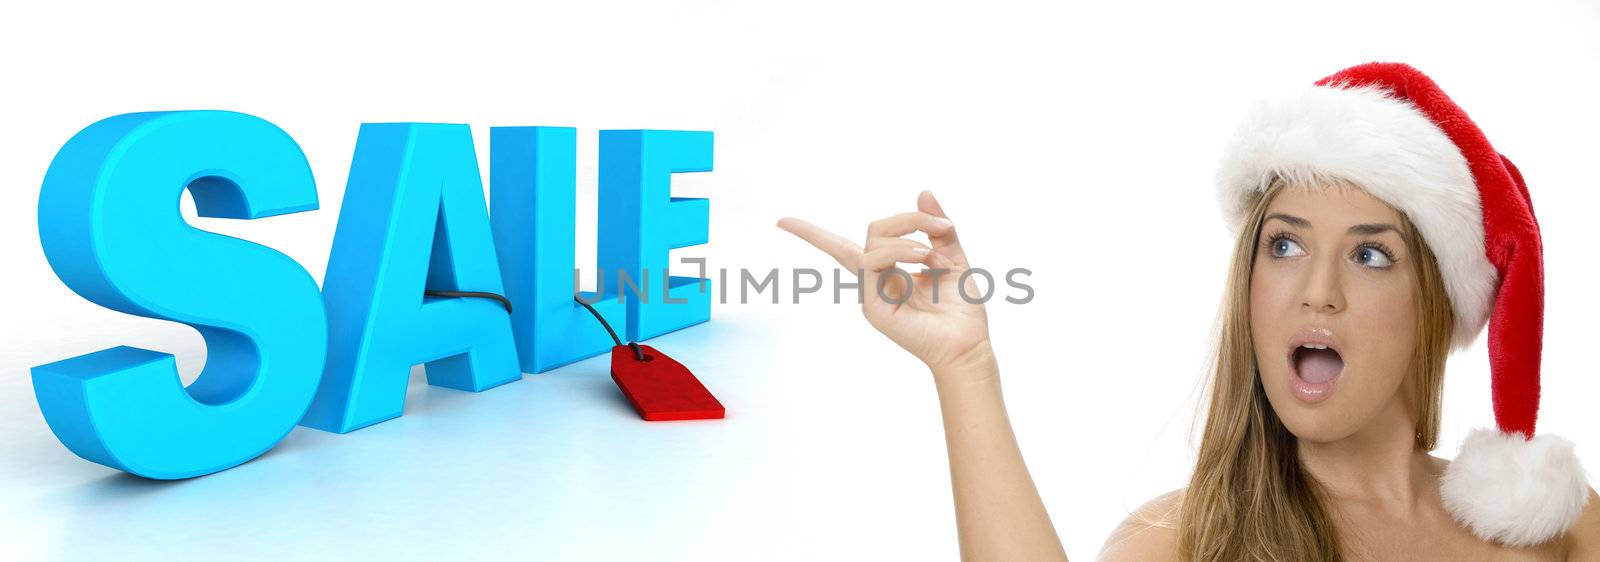 sexy lady pointing to sale 3d text on an isolated white background